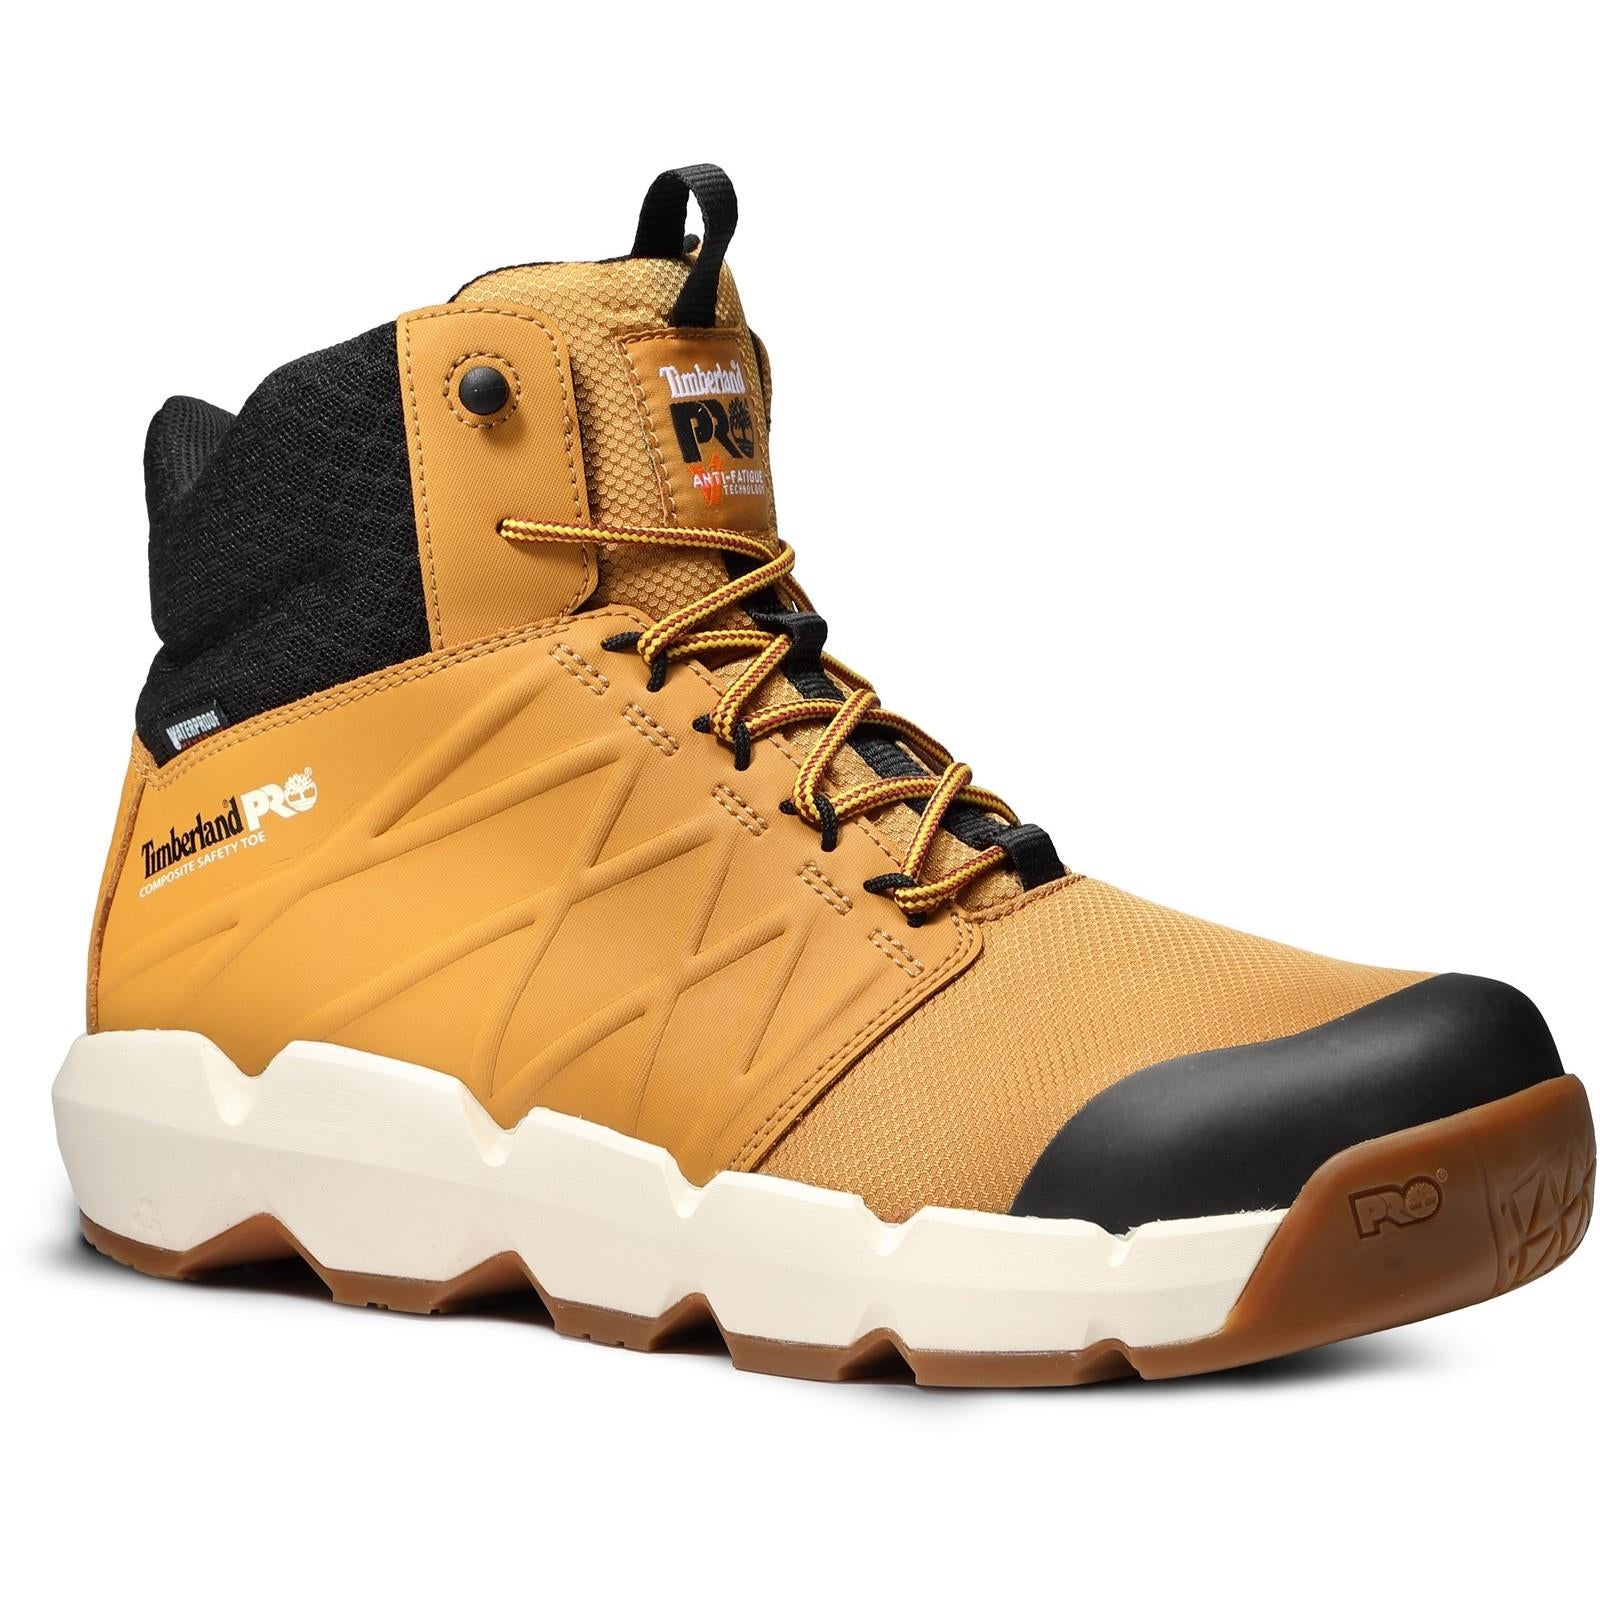 Timberland Pro Morphix S7 wheat composite toe waterproof work safety boots